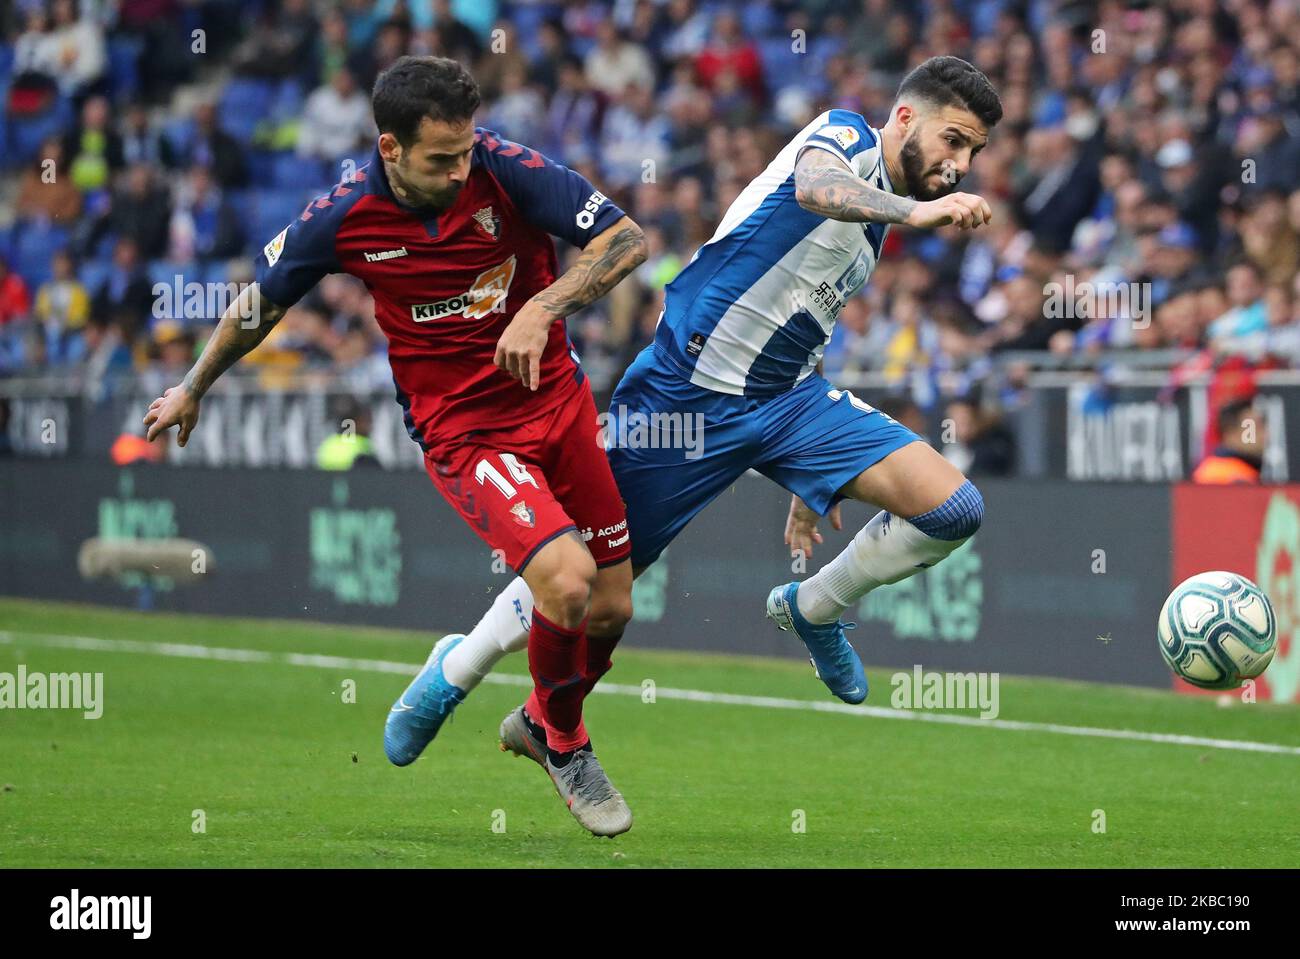 Ruben Garcia and Pipa during the match between RCD Espanyol and Club Atletico Osasuna, corresponding to the week 15 of the Liga Santander, on 01rst December 2019, in Barcelona, Spain. (Photo by Joan Valls/Urbanandsport /NurPhoto) Stock Photo